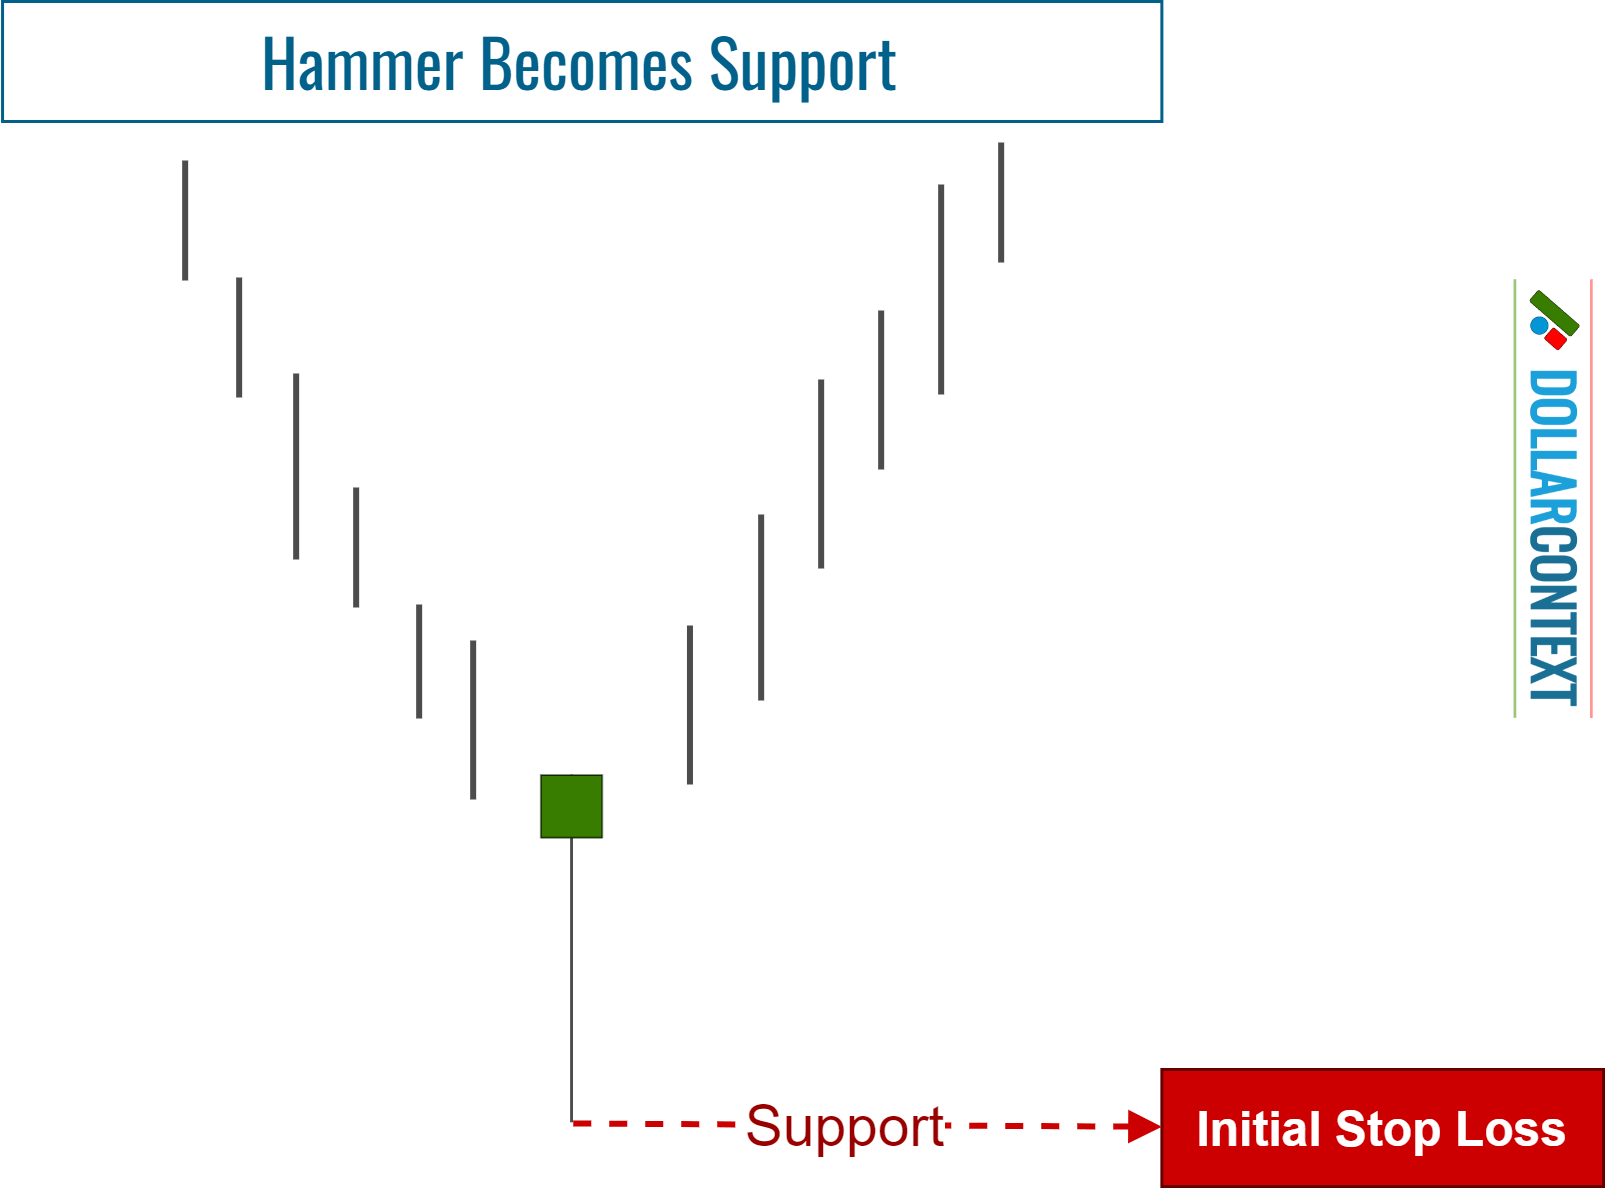 Initial Stop-Loss After Observing a Hammer